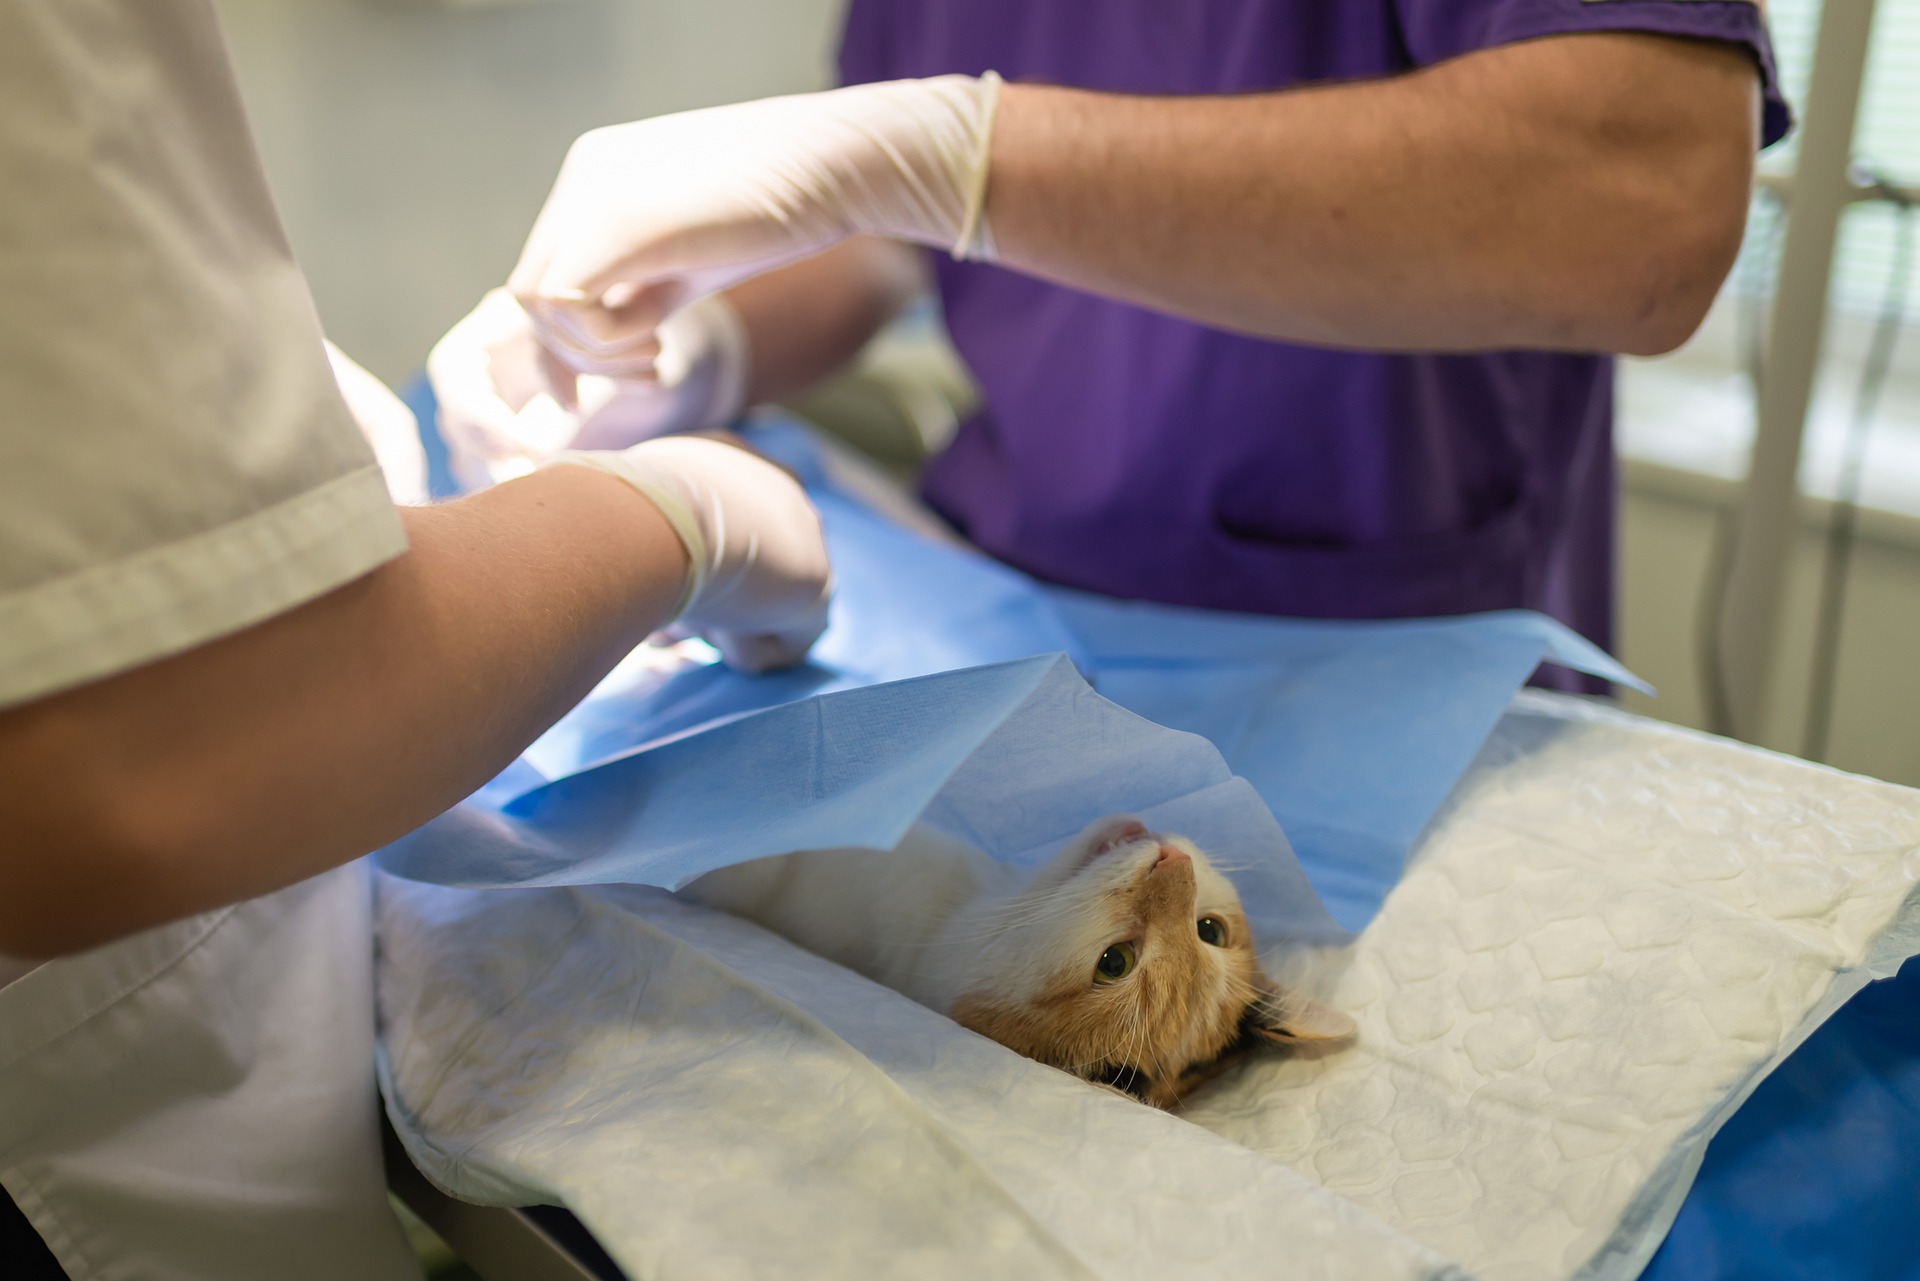 Is growth by acquisition of National Veterinary Care Ltd™s core strategy?